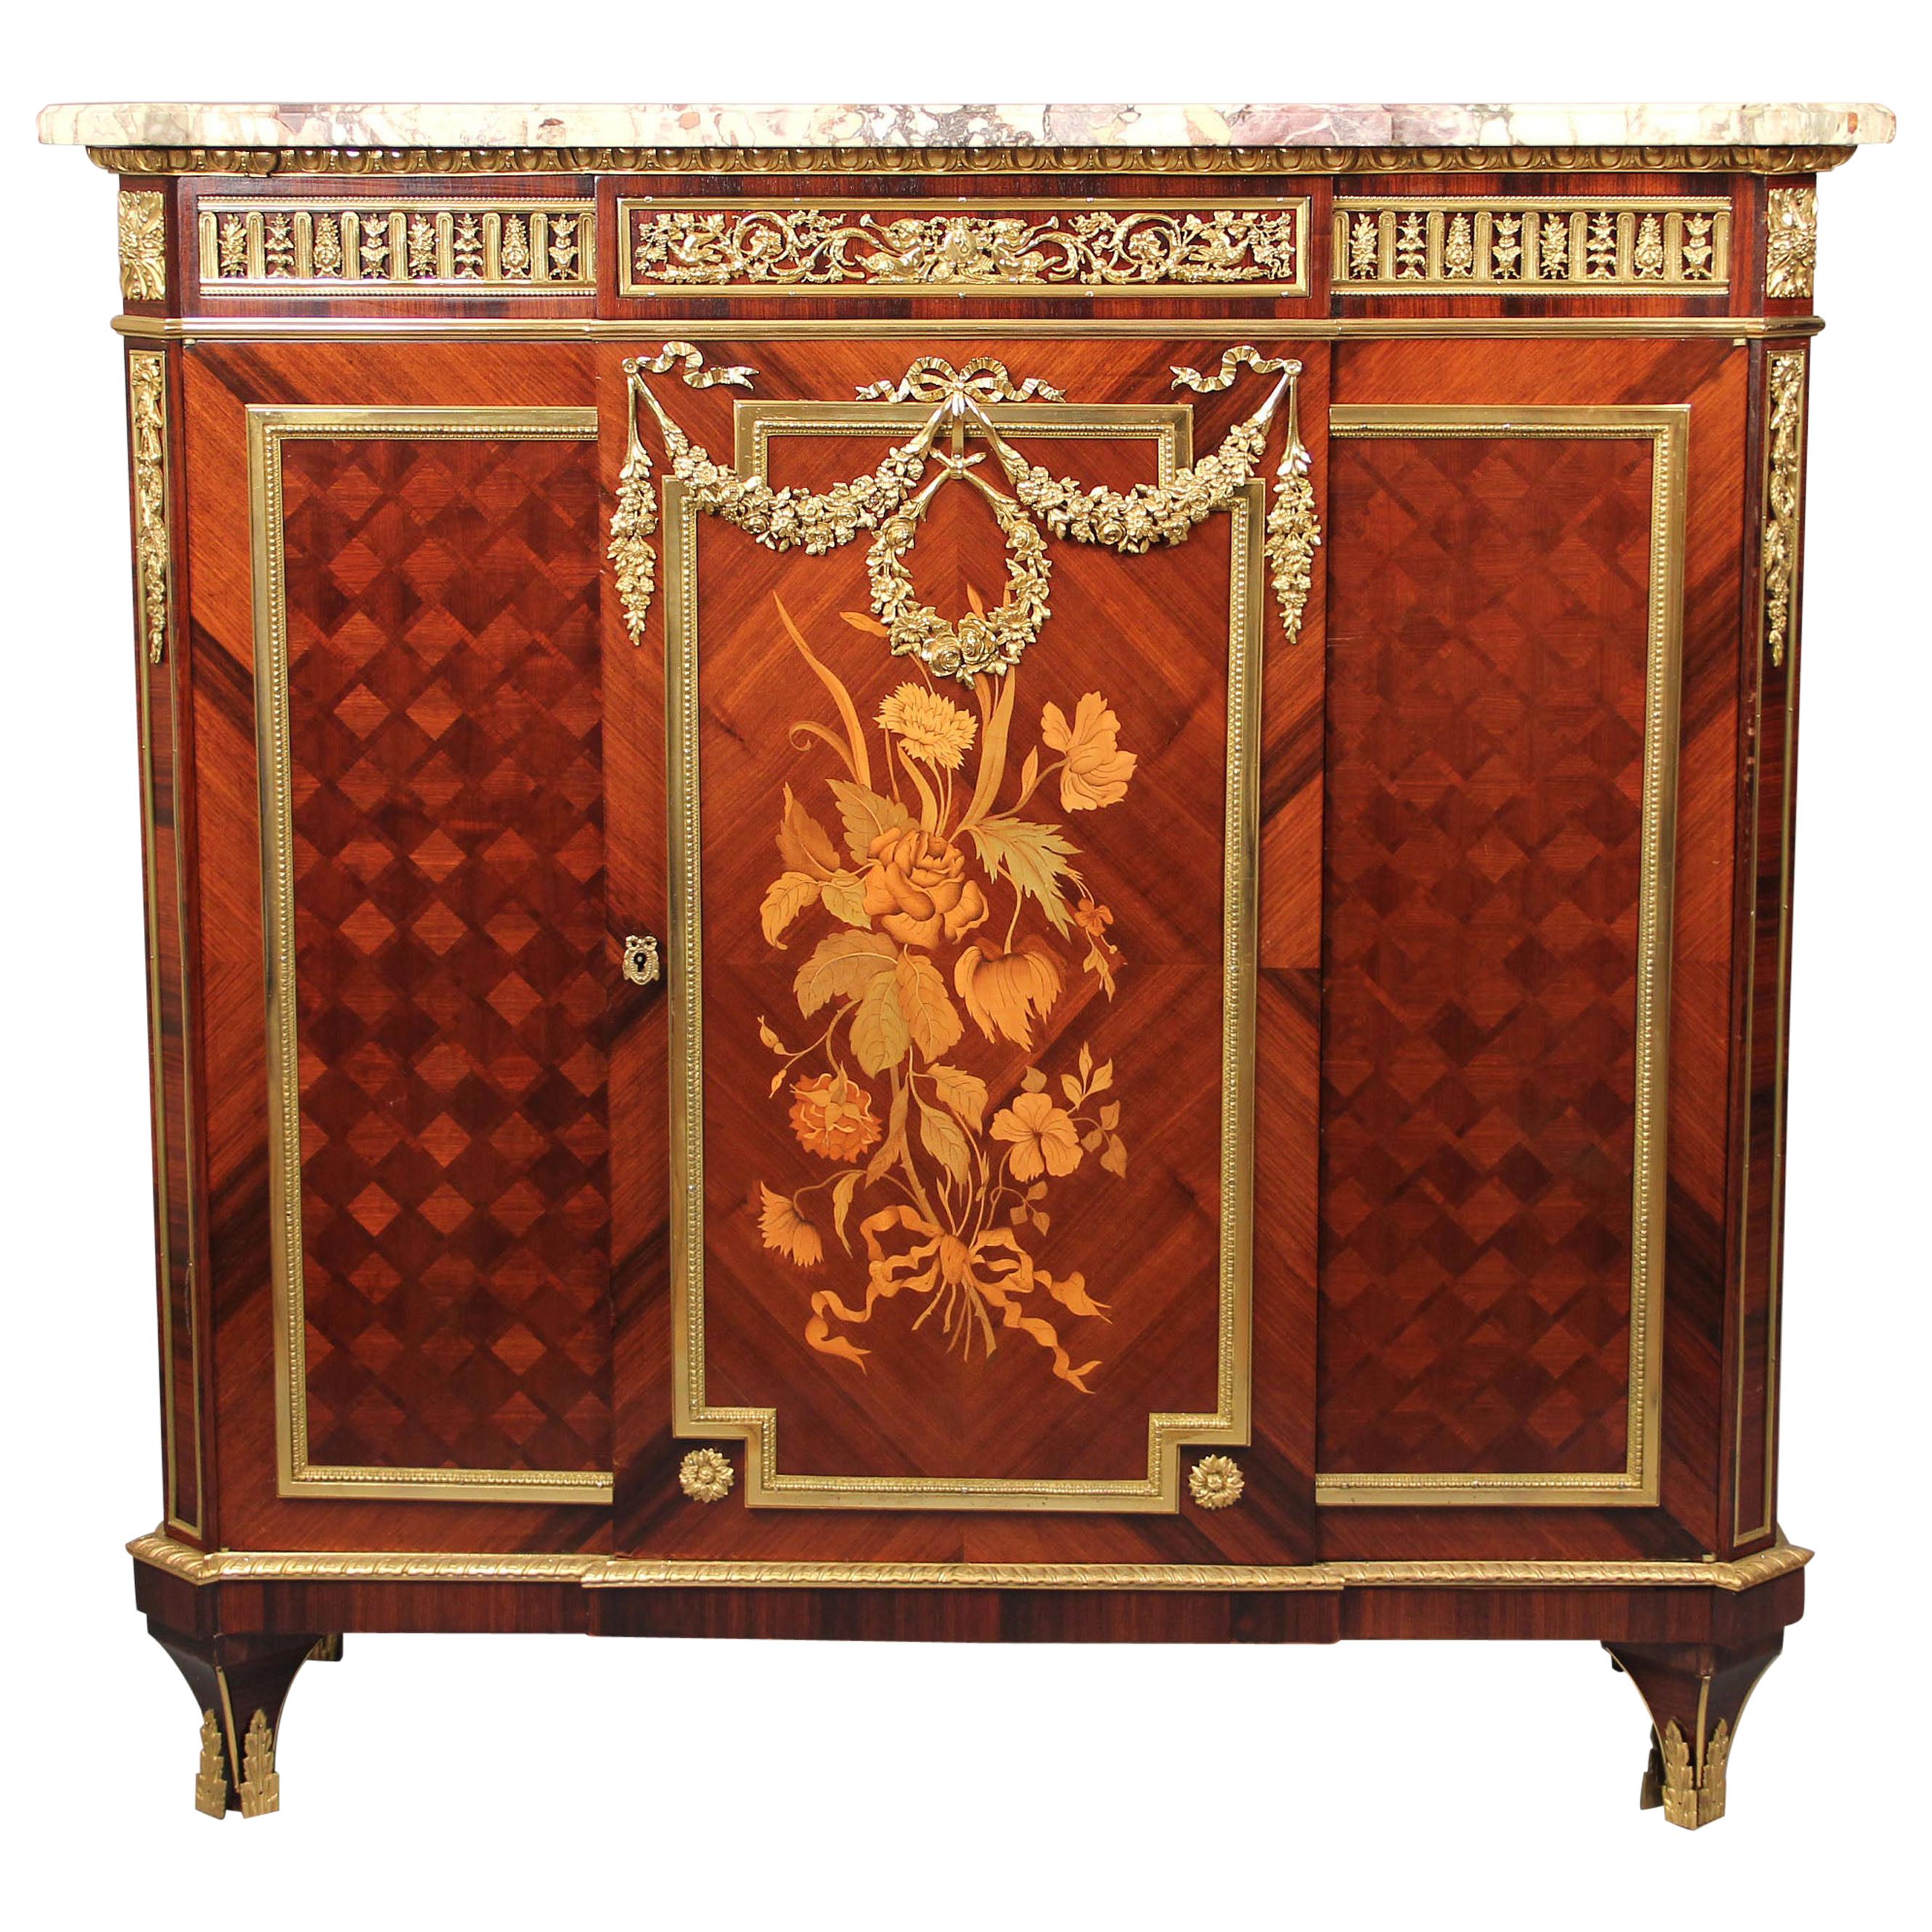 Late 19th Century Gilt Bronze Mounted Marquetry and Parquetry Cabinet by Millet